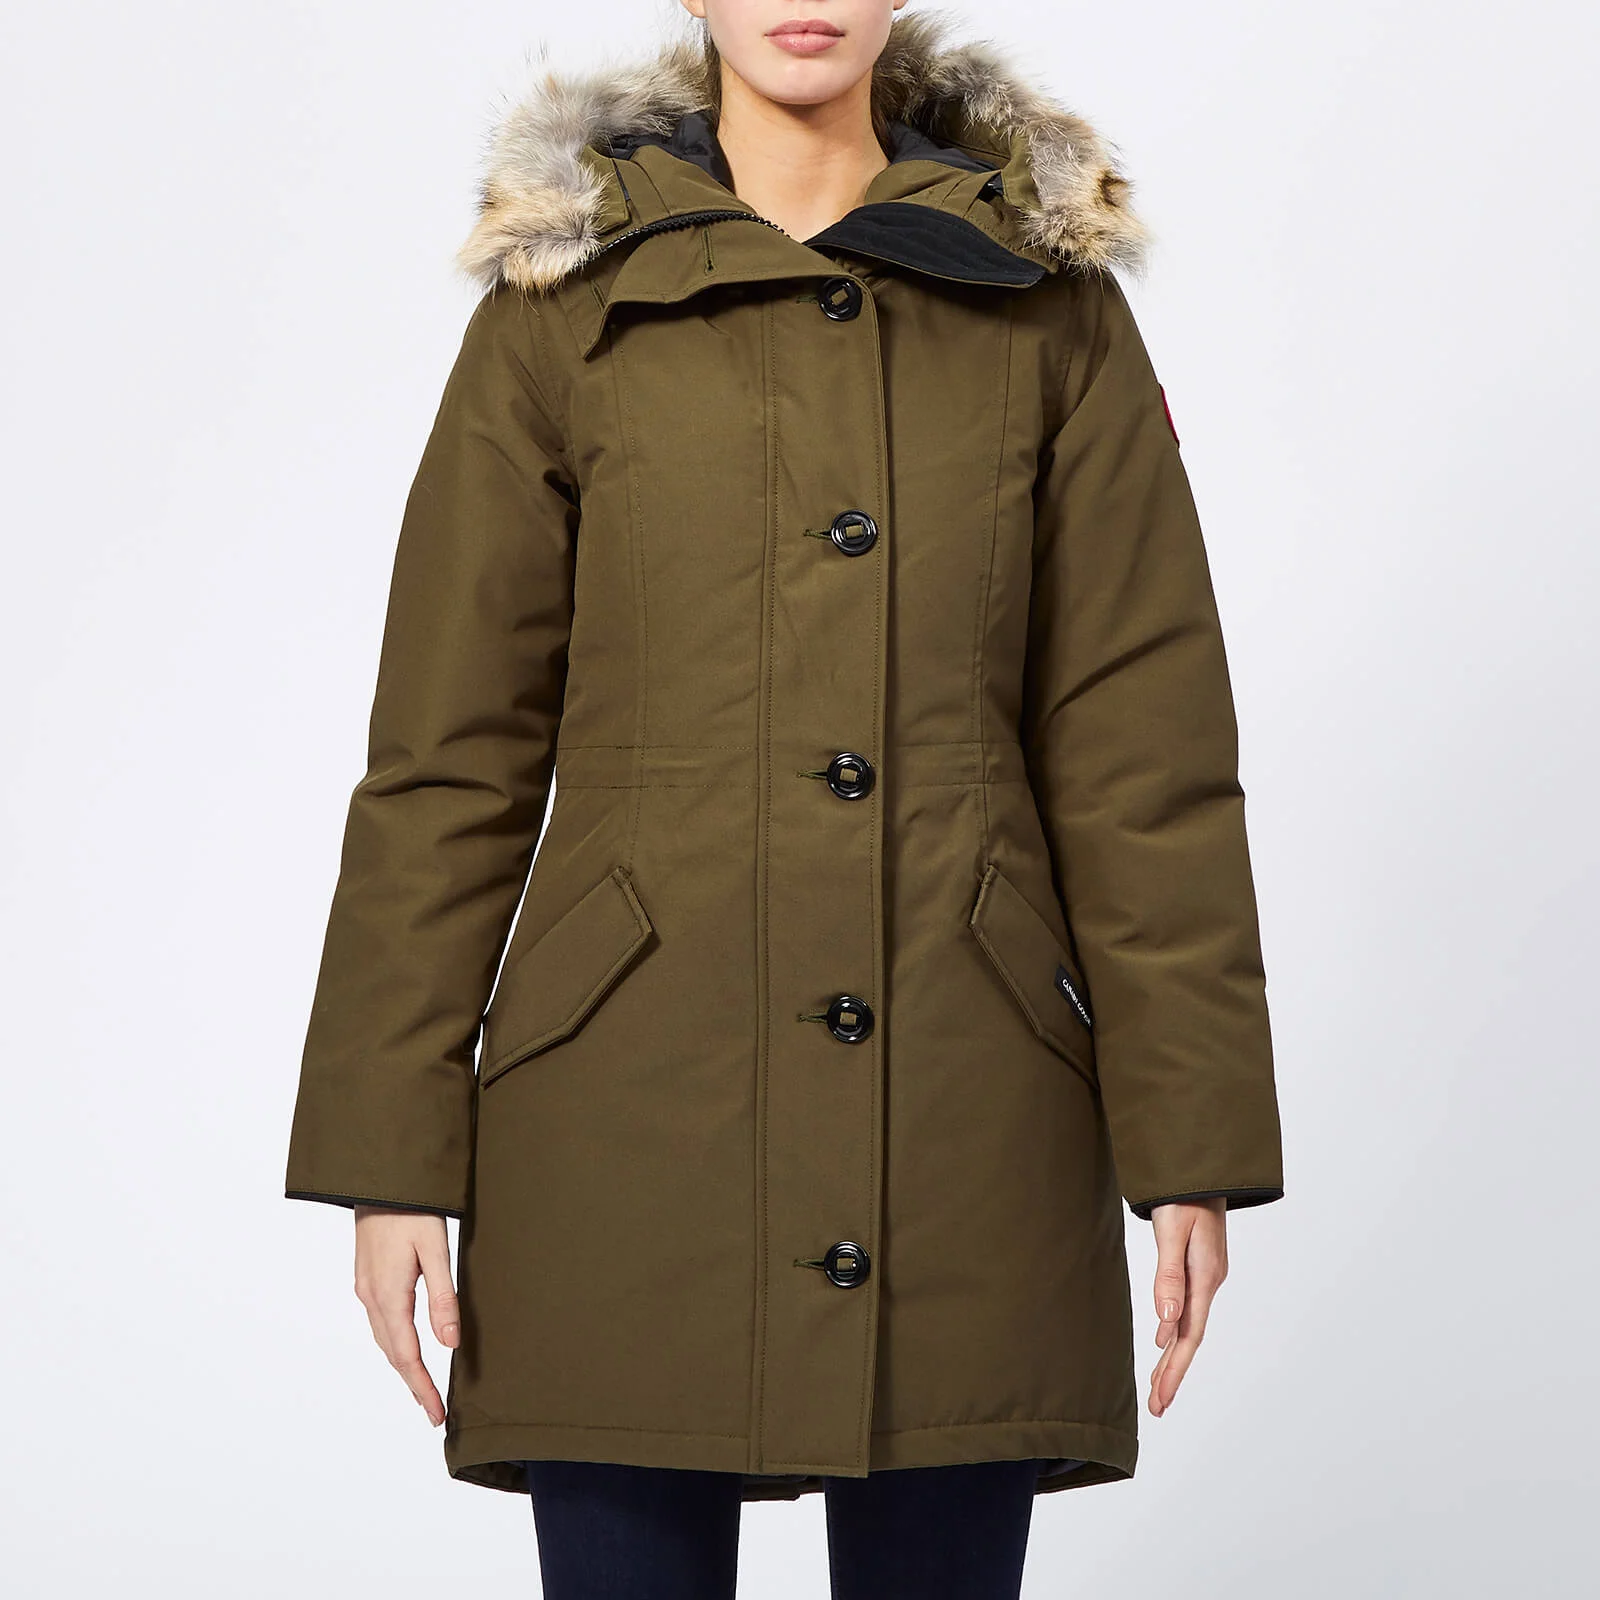 Canada Goose Women's Rossclair Parka - Military Green Image 1